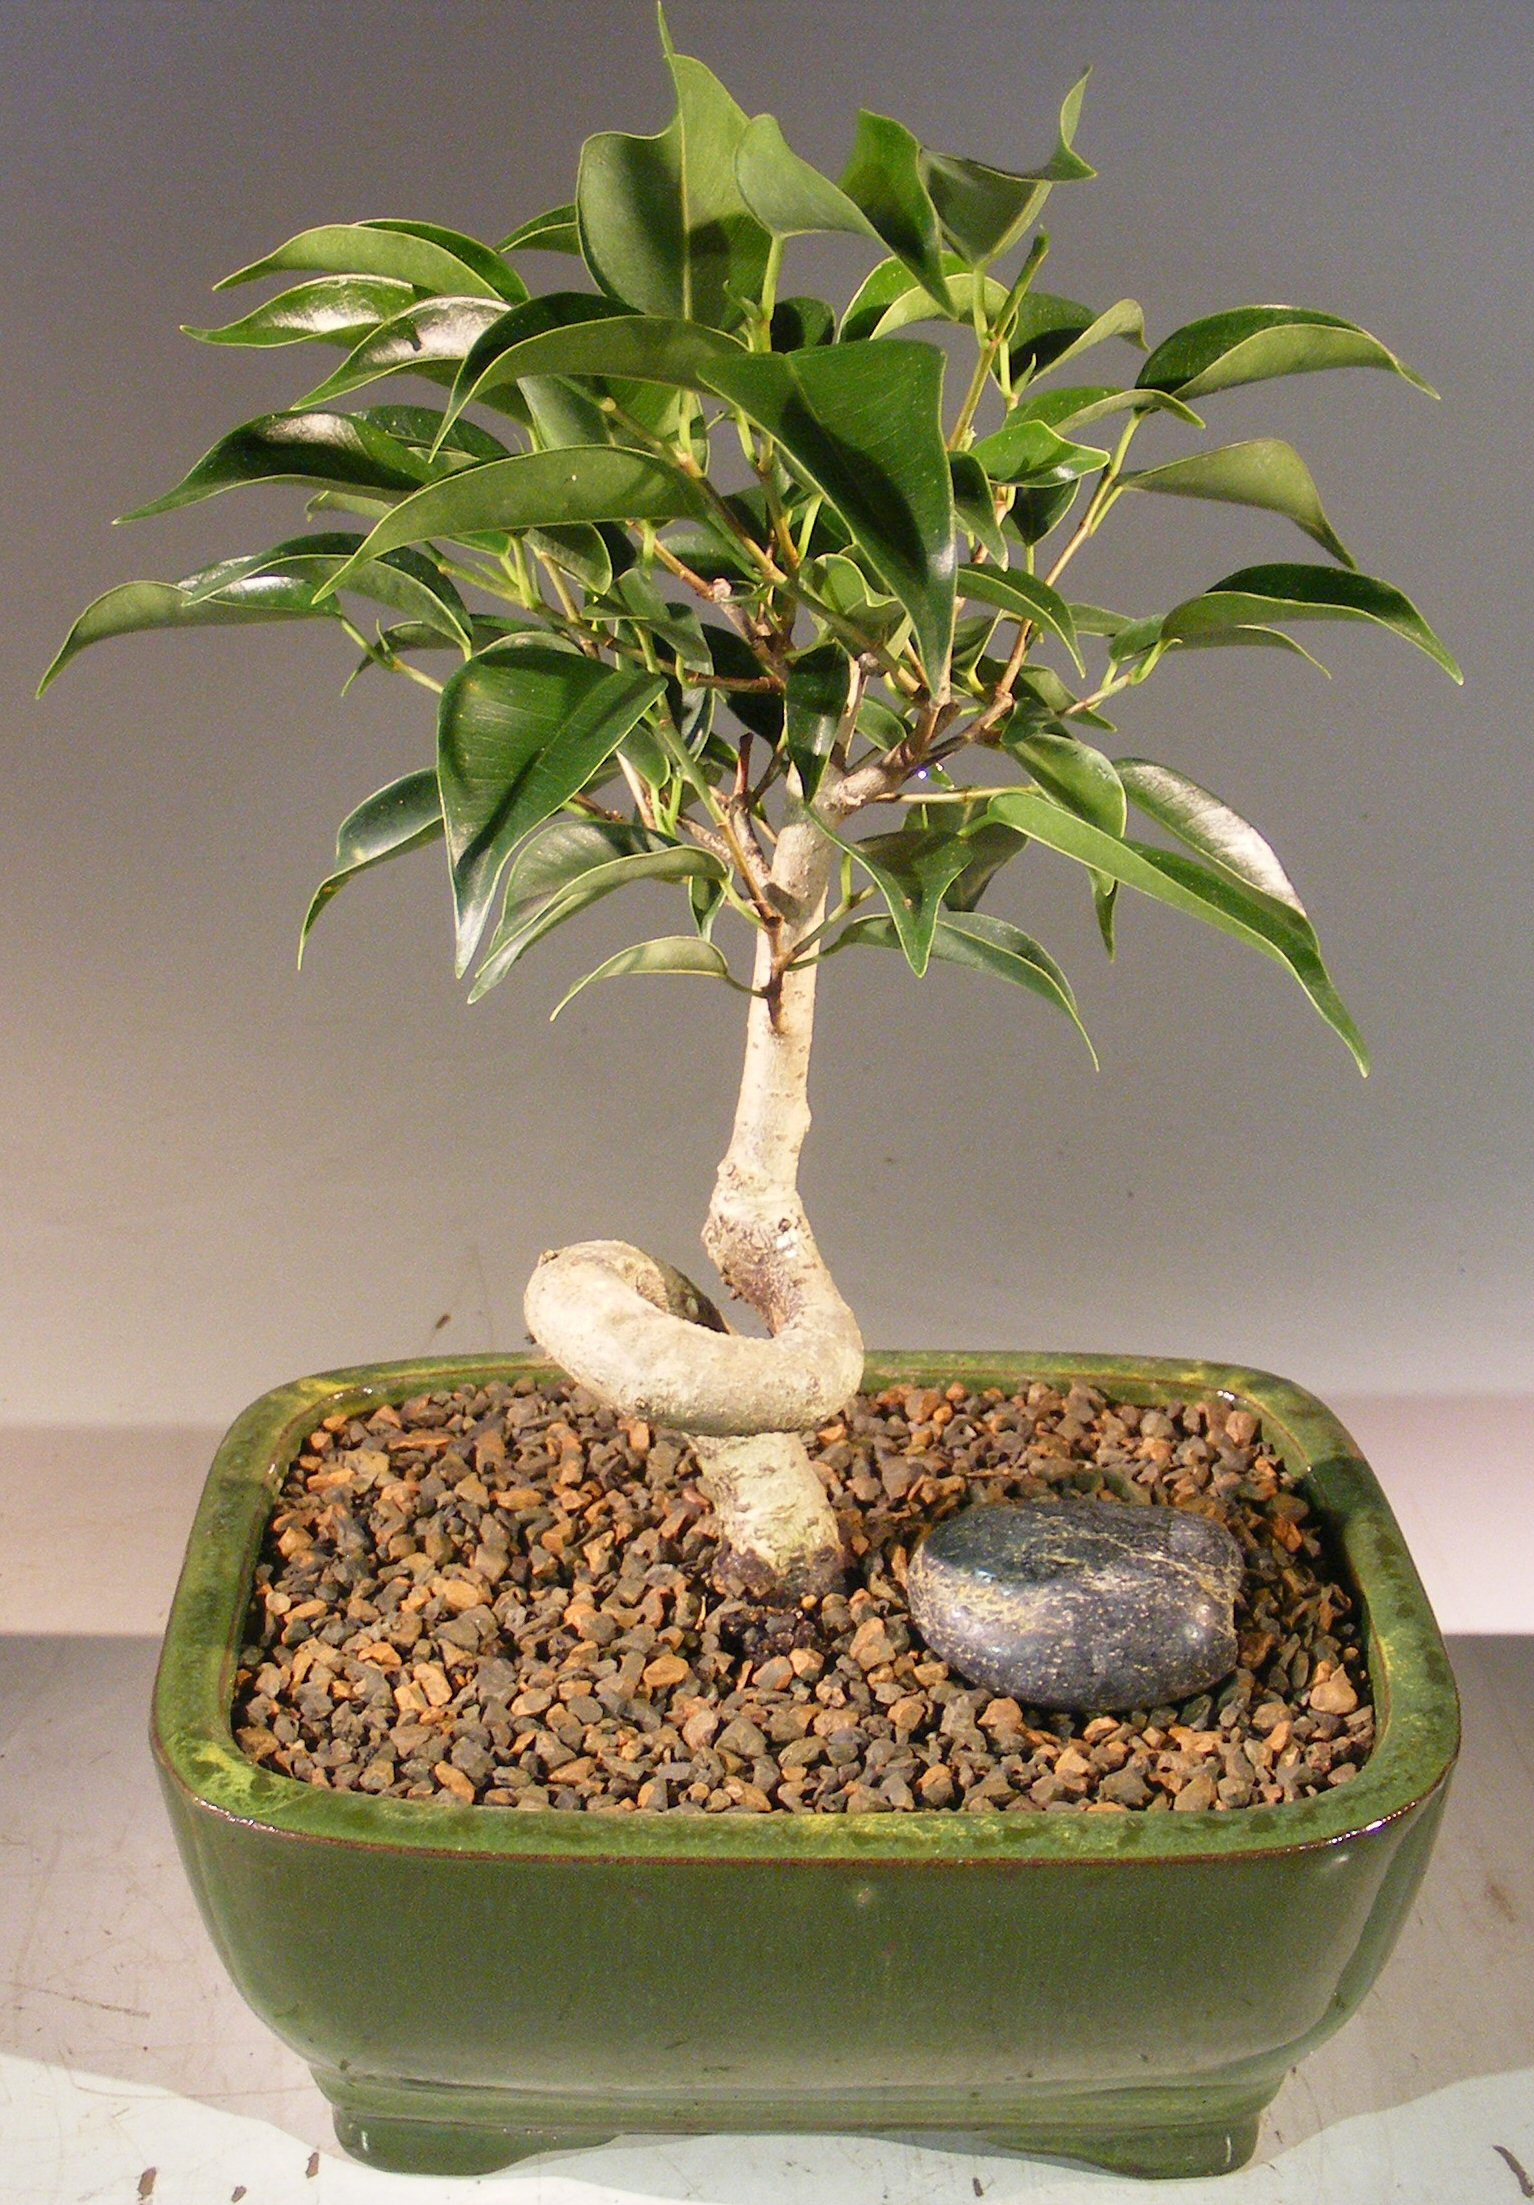 Fig species which is native to South and South-East Asia. This evergreen tree is particularly good for bonsai training as they produce sturdy trunks, good branching charachteristics and shiny leaves. Best to trim in early summer as the new leaves that subsequently grow will be smaller than the ones removed. Ours is trained in the coiled trunk style. Great for indoors year-round, the brighter the location, the more compact the growth.